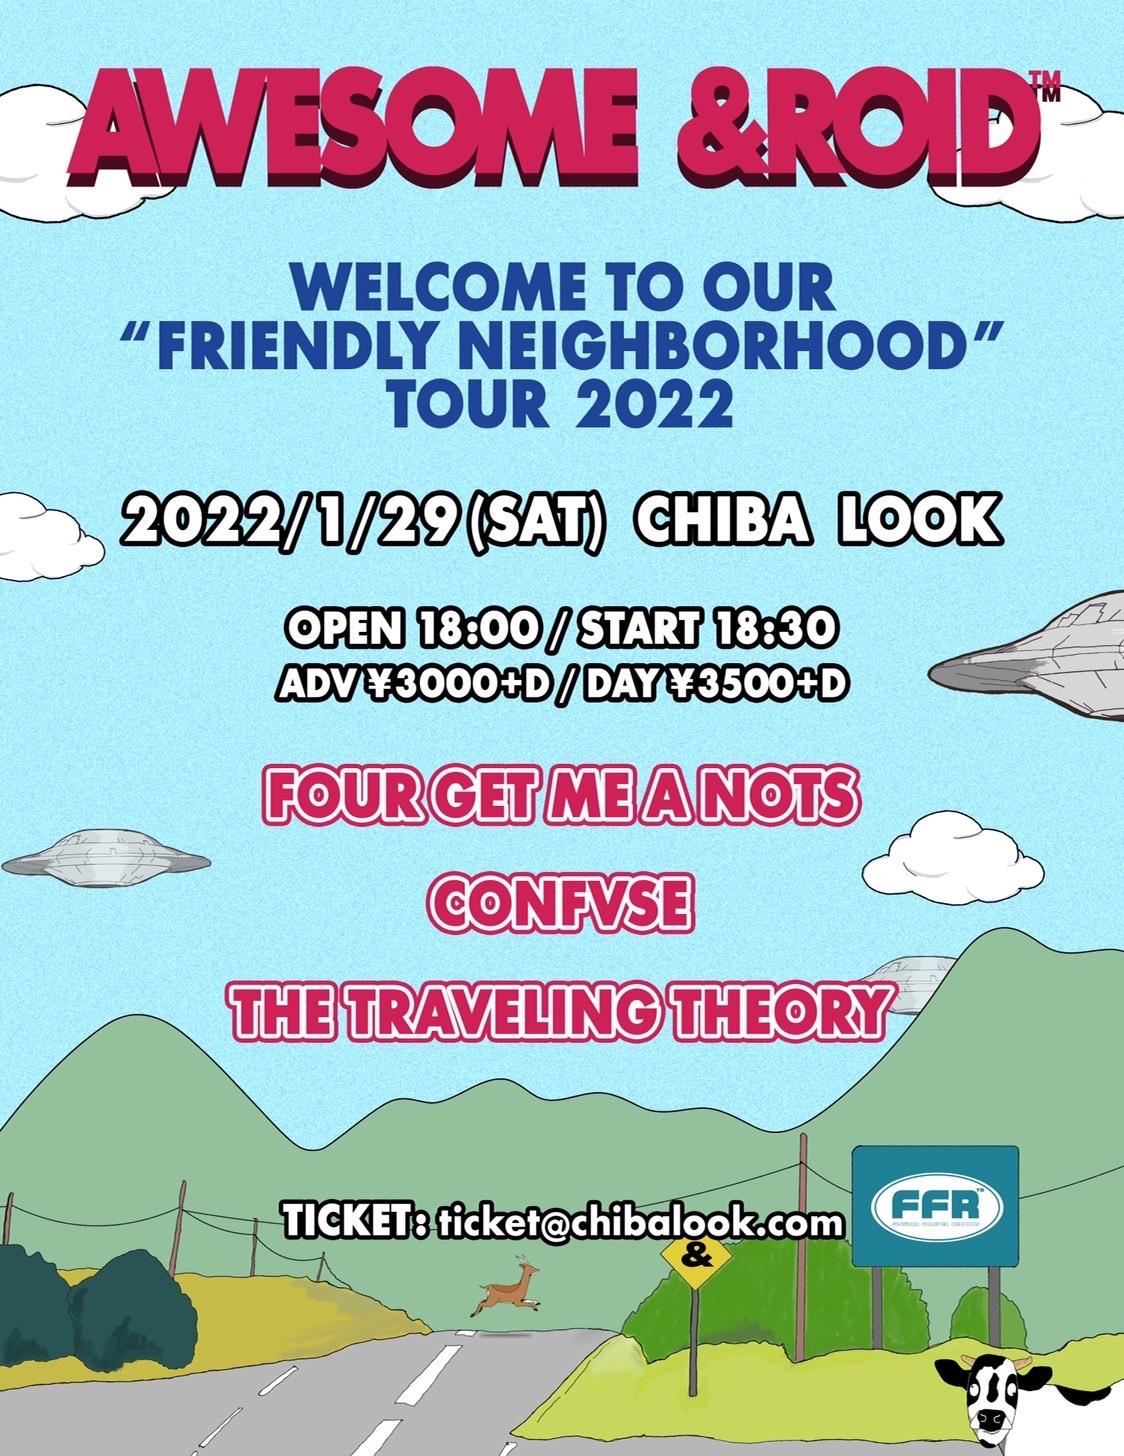 Welcome to our friendly neighborhood tour 2022